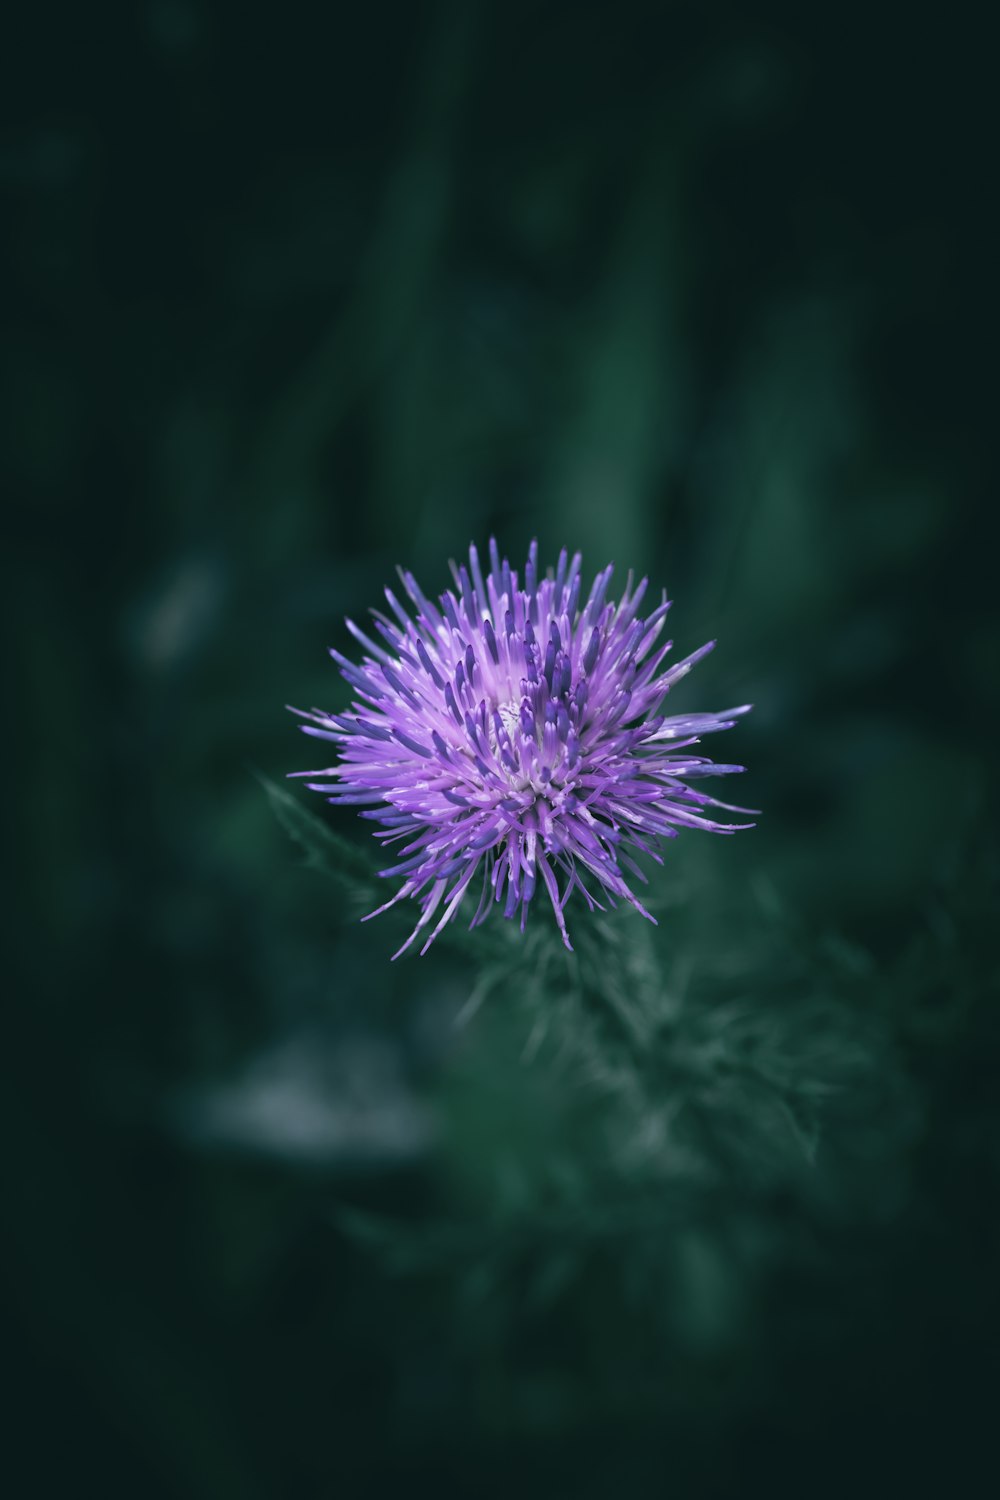 a close up of a purple flower on a dark background